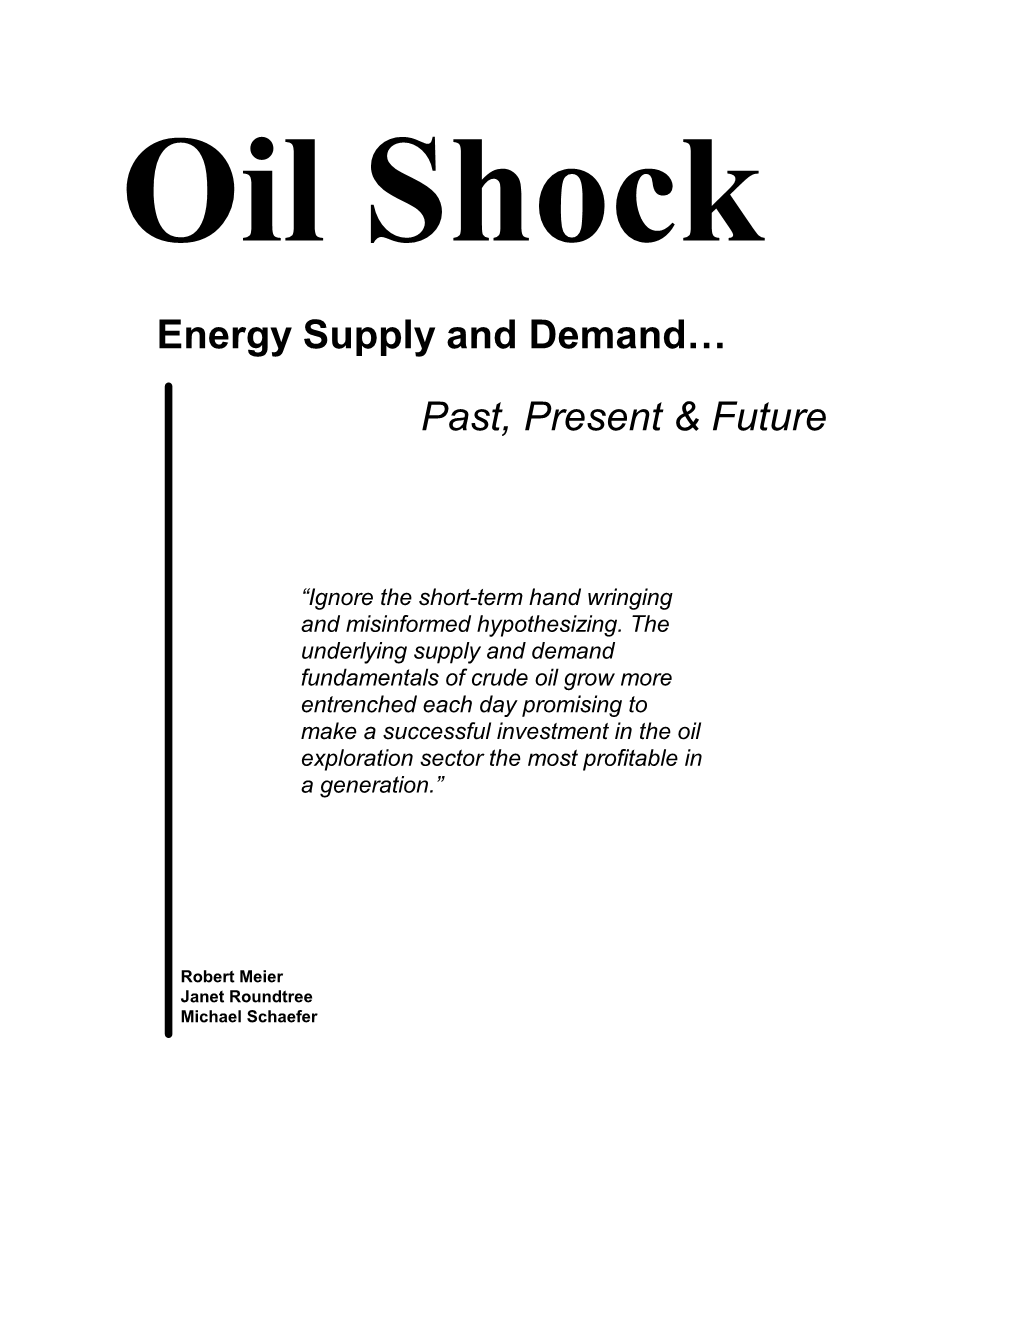 Oil Shock Energy Supply and Demand… Past, Present & Future